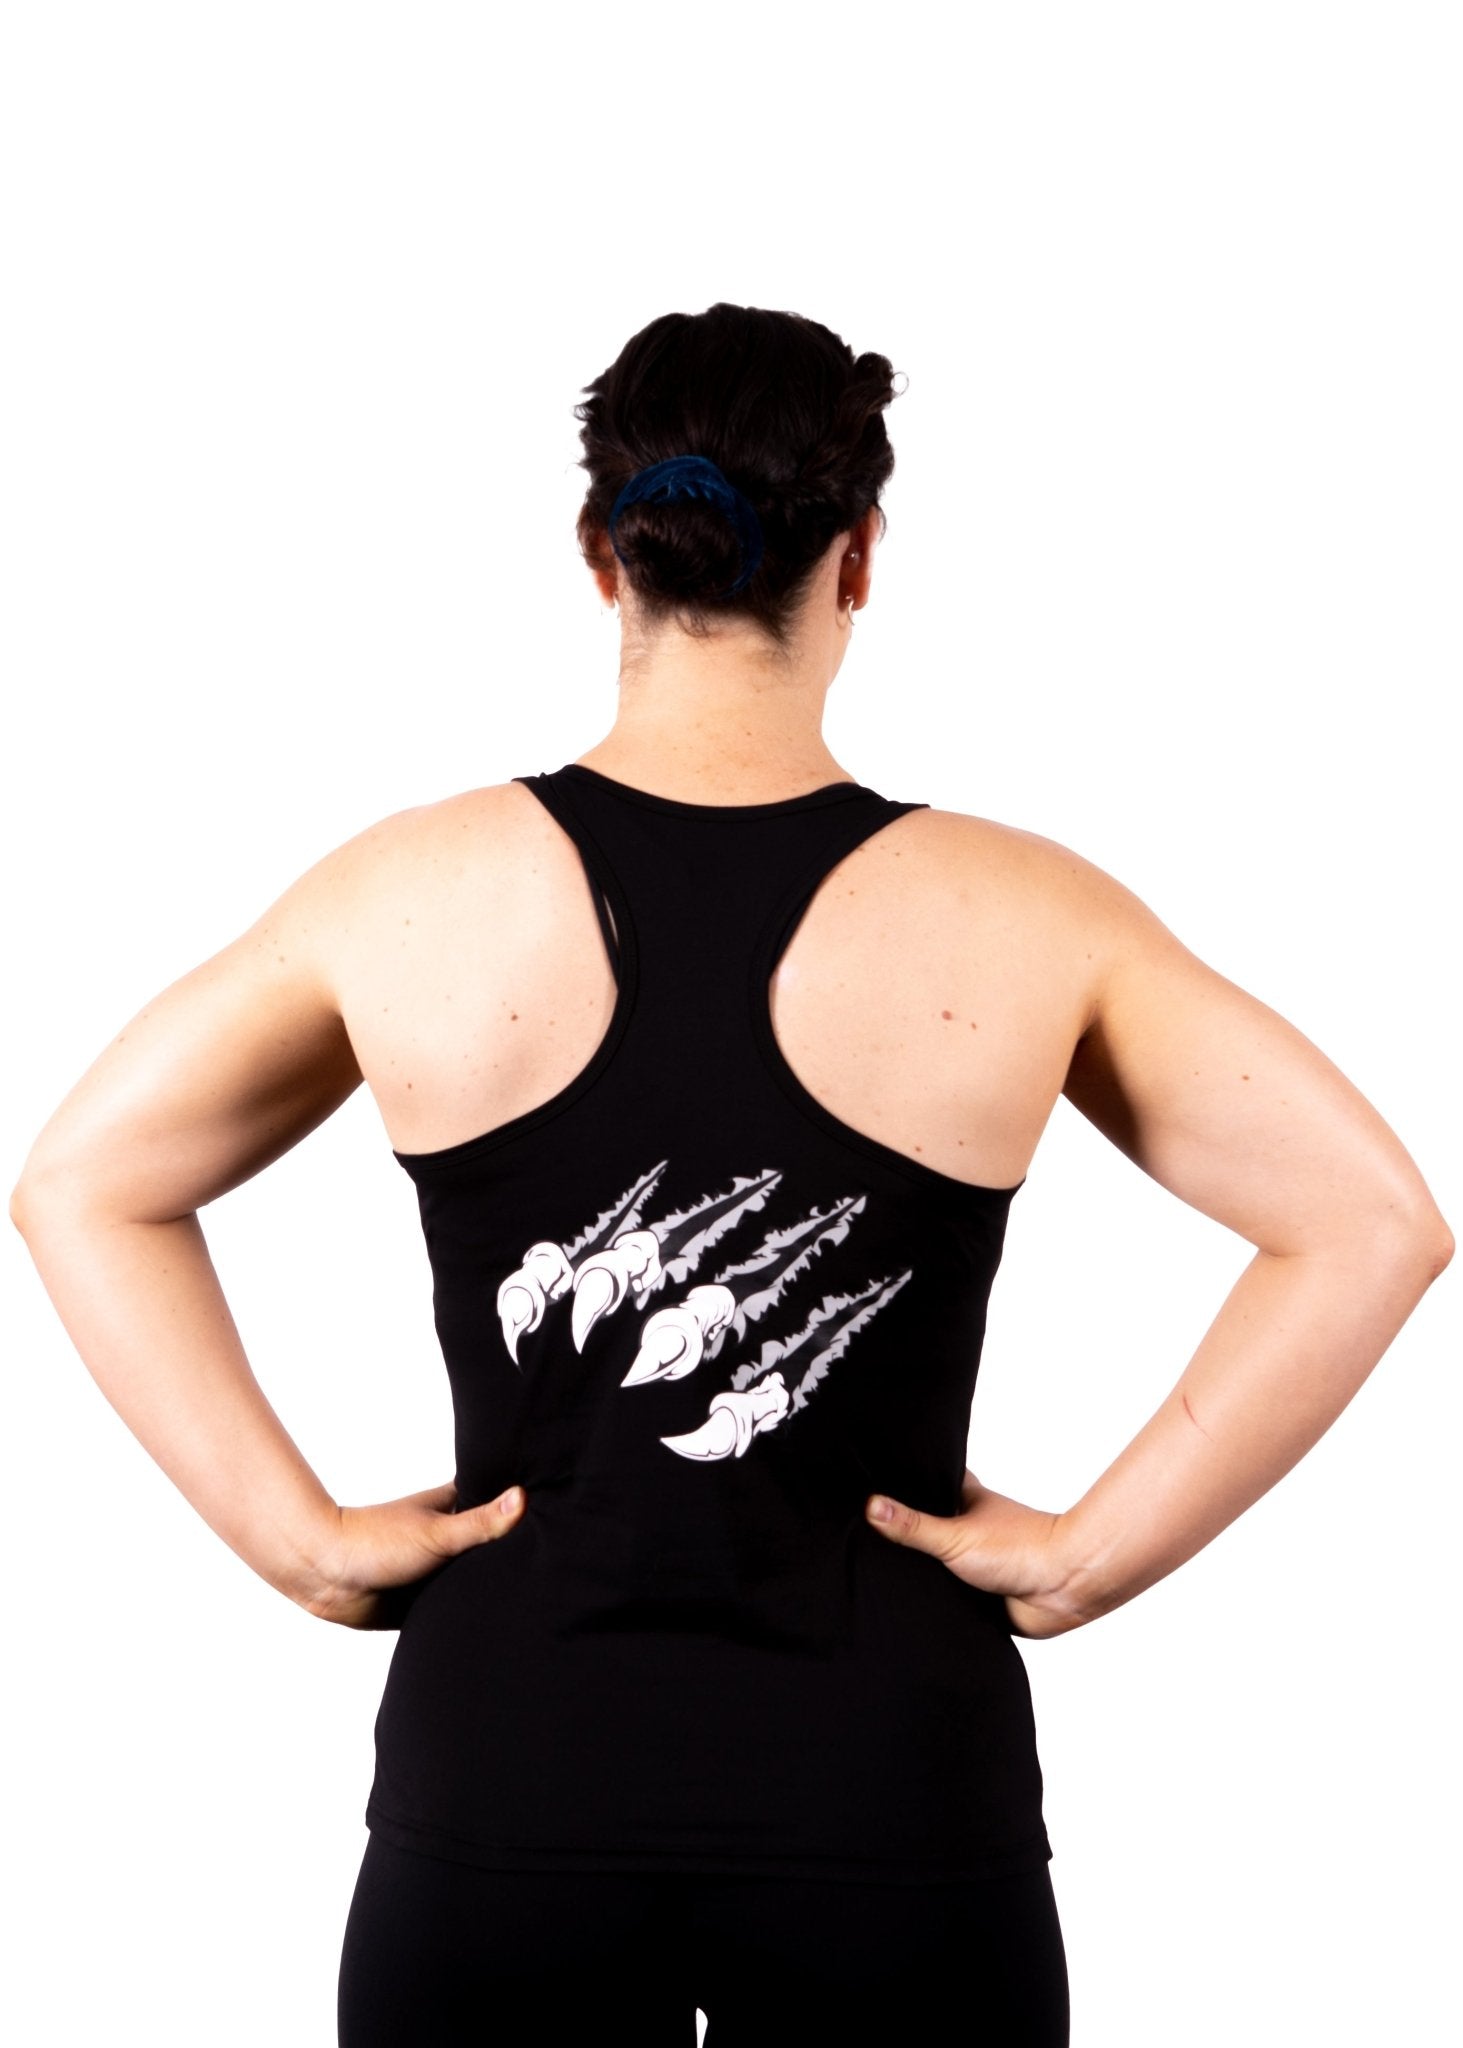 Cave Apparel - Women's Racer Back Singlet Grey - Merchandise - Grey - The Cave Gym